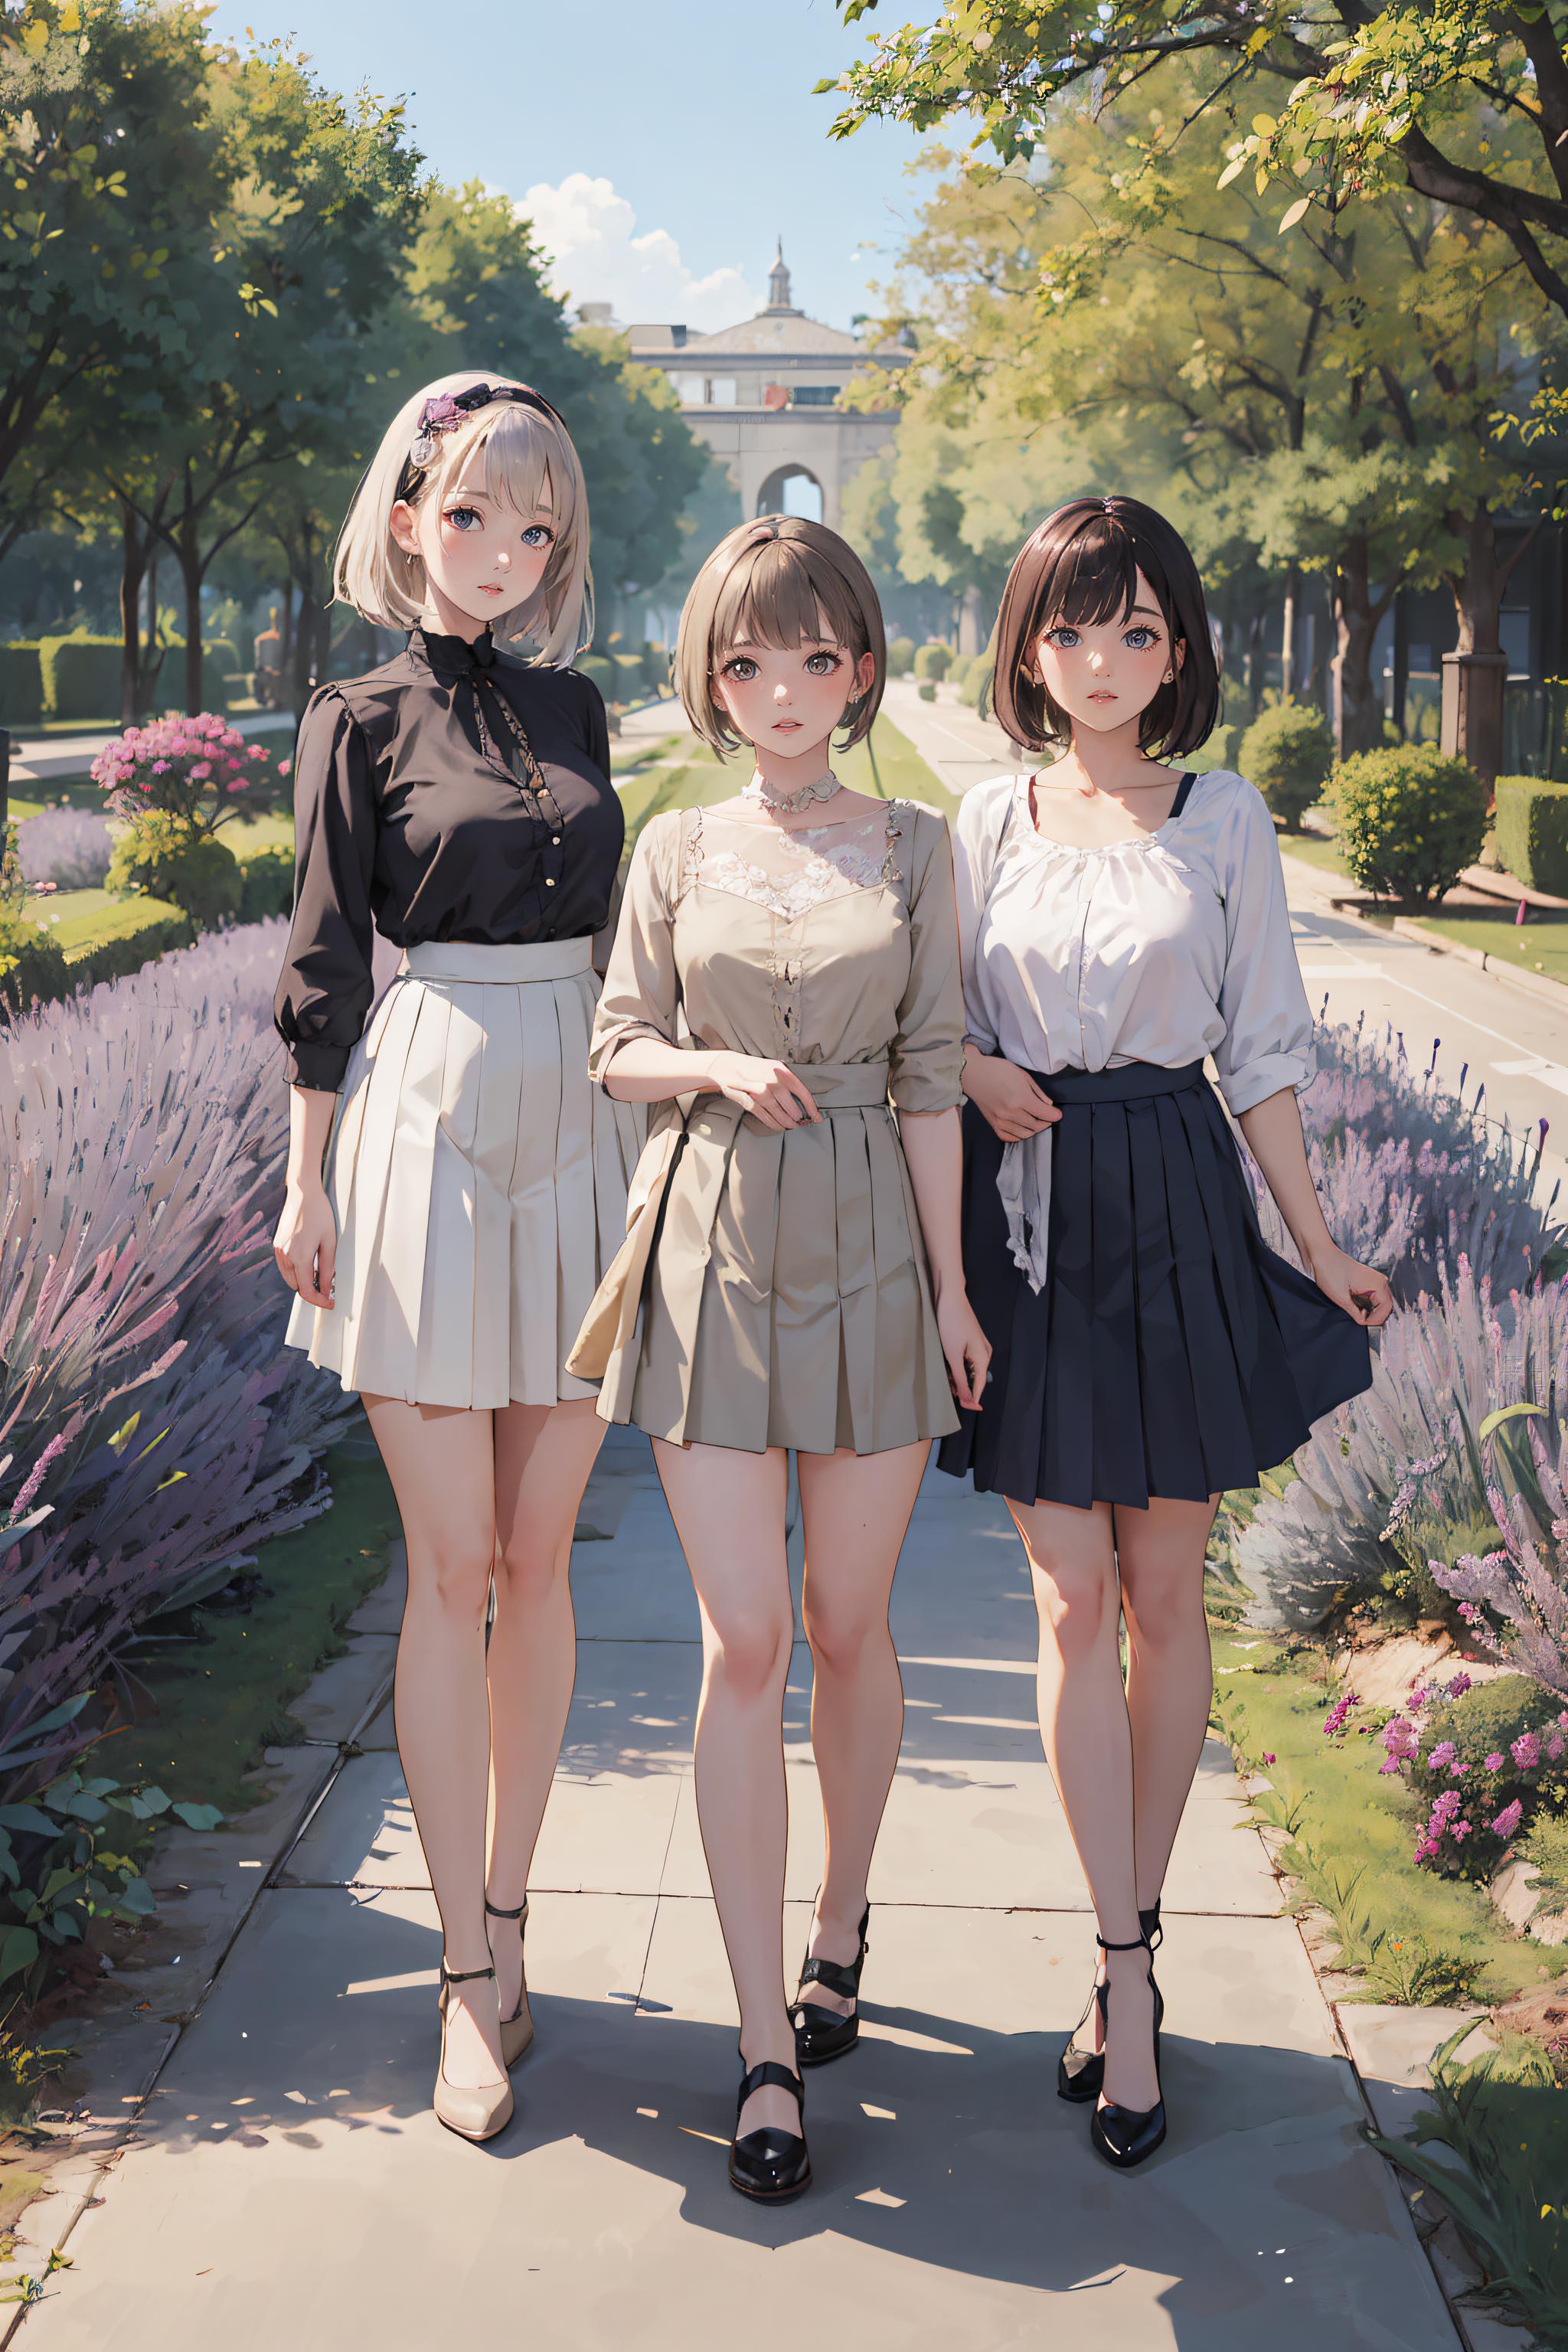 Three anime characters dressed in skirts and shorts walking down a sidewalk.